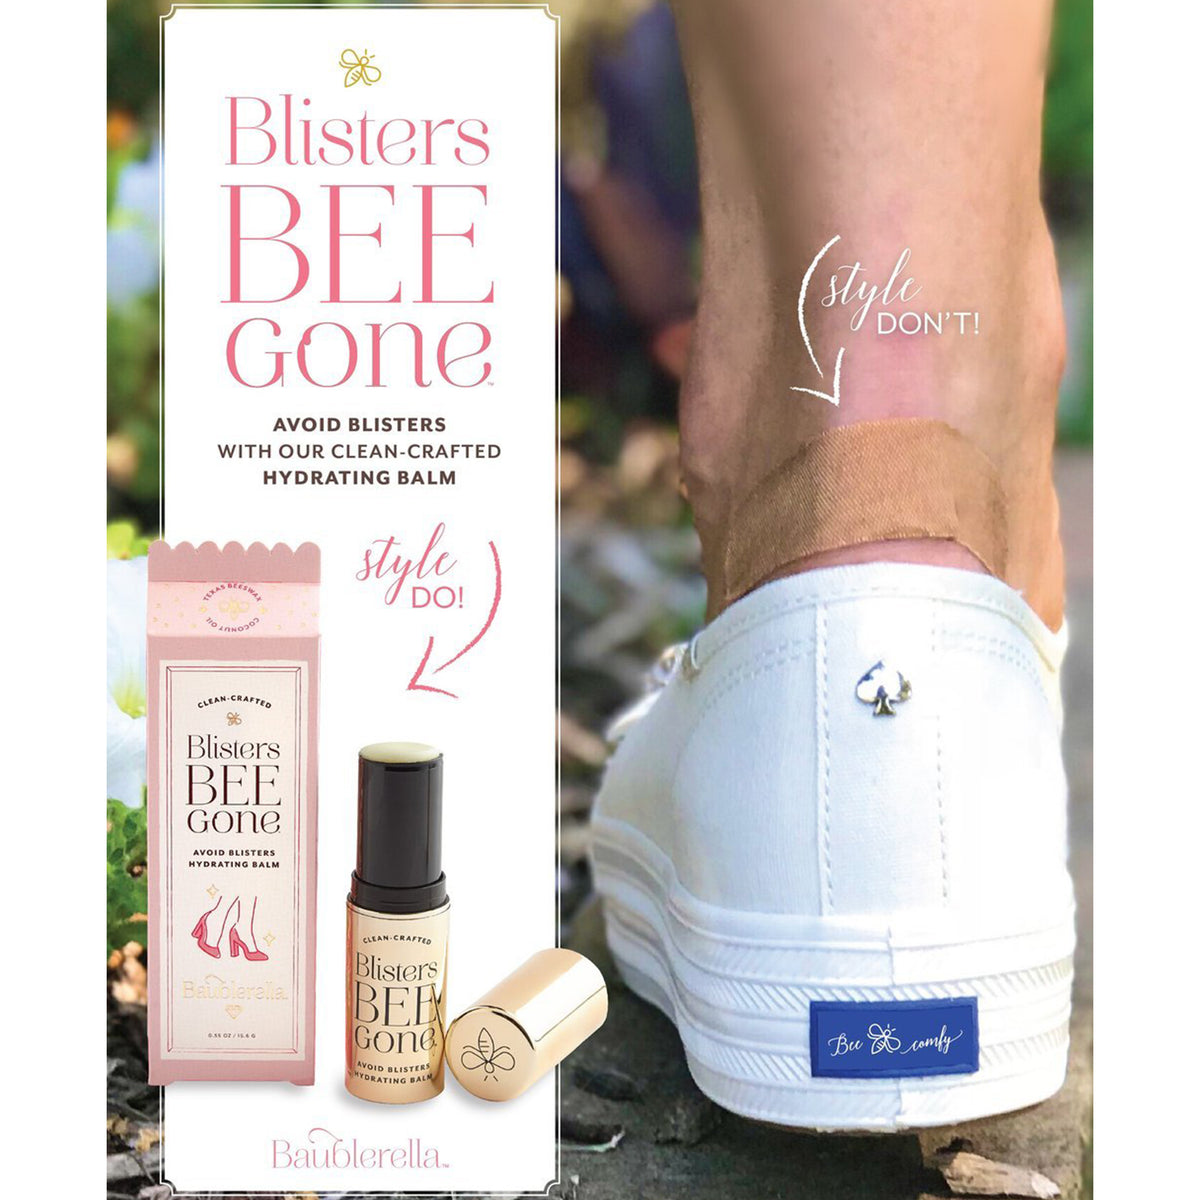 Blisters Bee Gone - All She Wrote